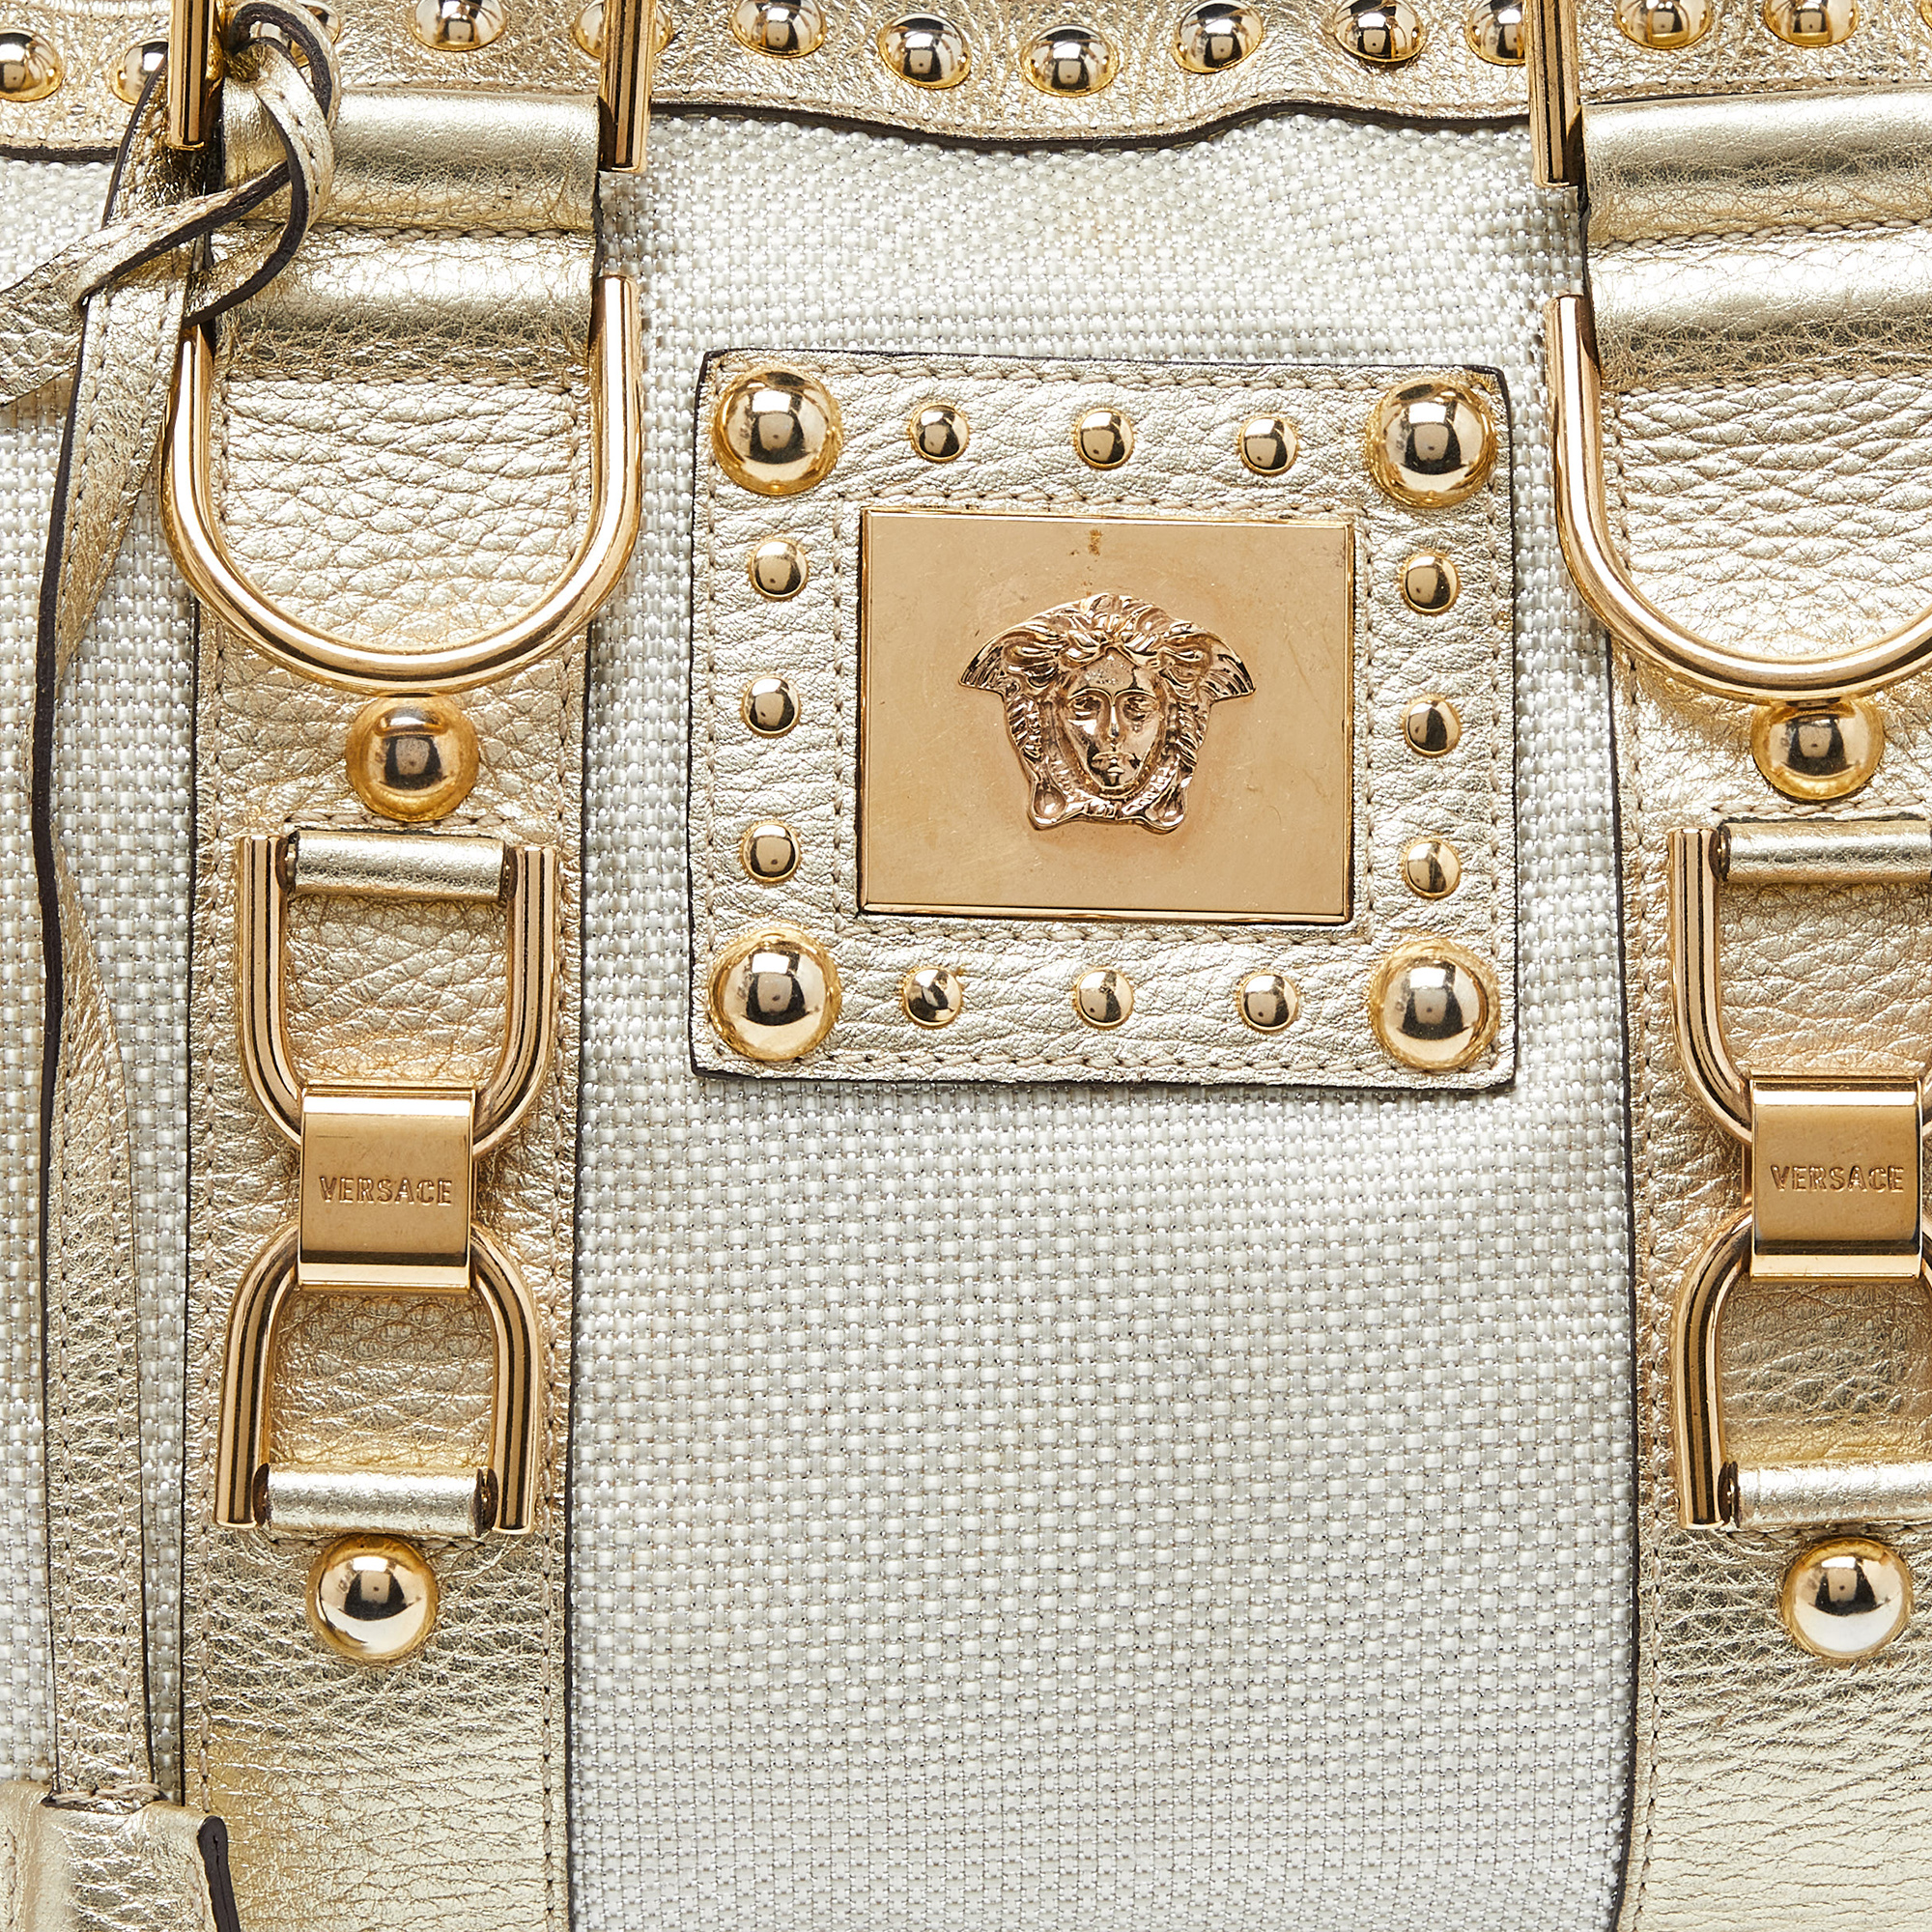 Versace Beige/Gold Nylon And Leather Studded Madonna Satchel